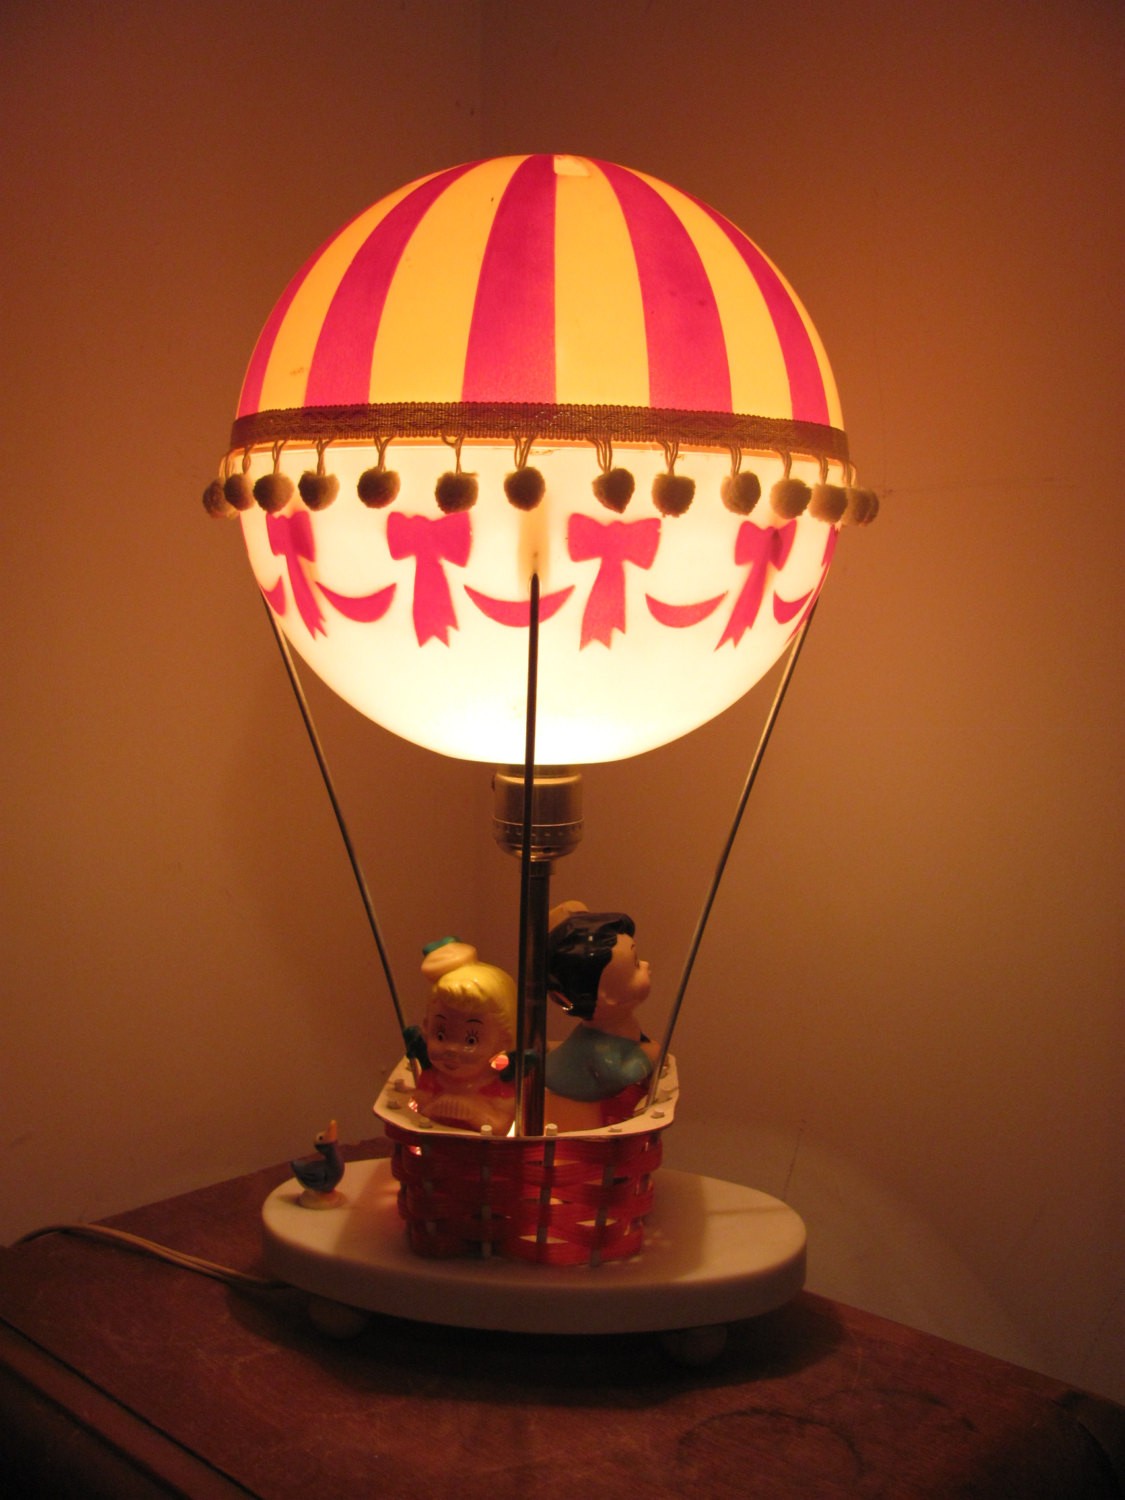 Vintage hot air balloon lamp nightlight dolly by